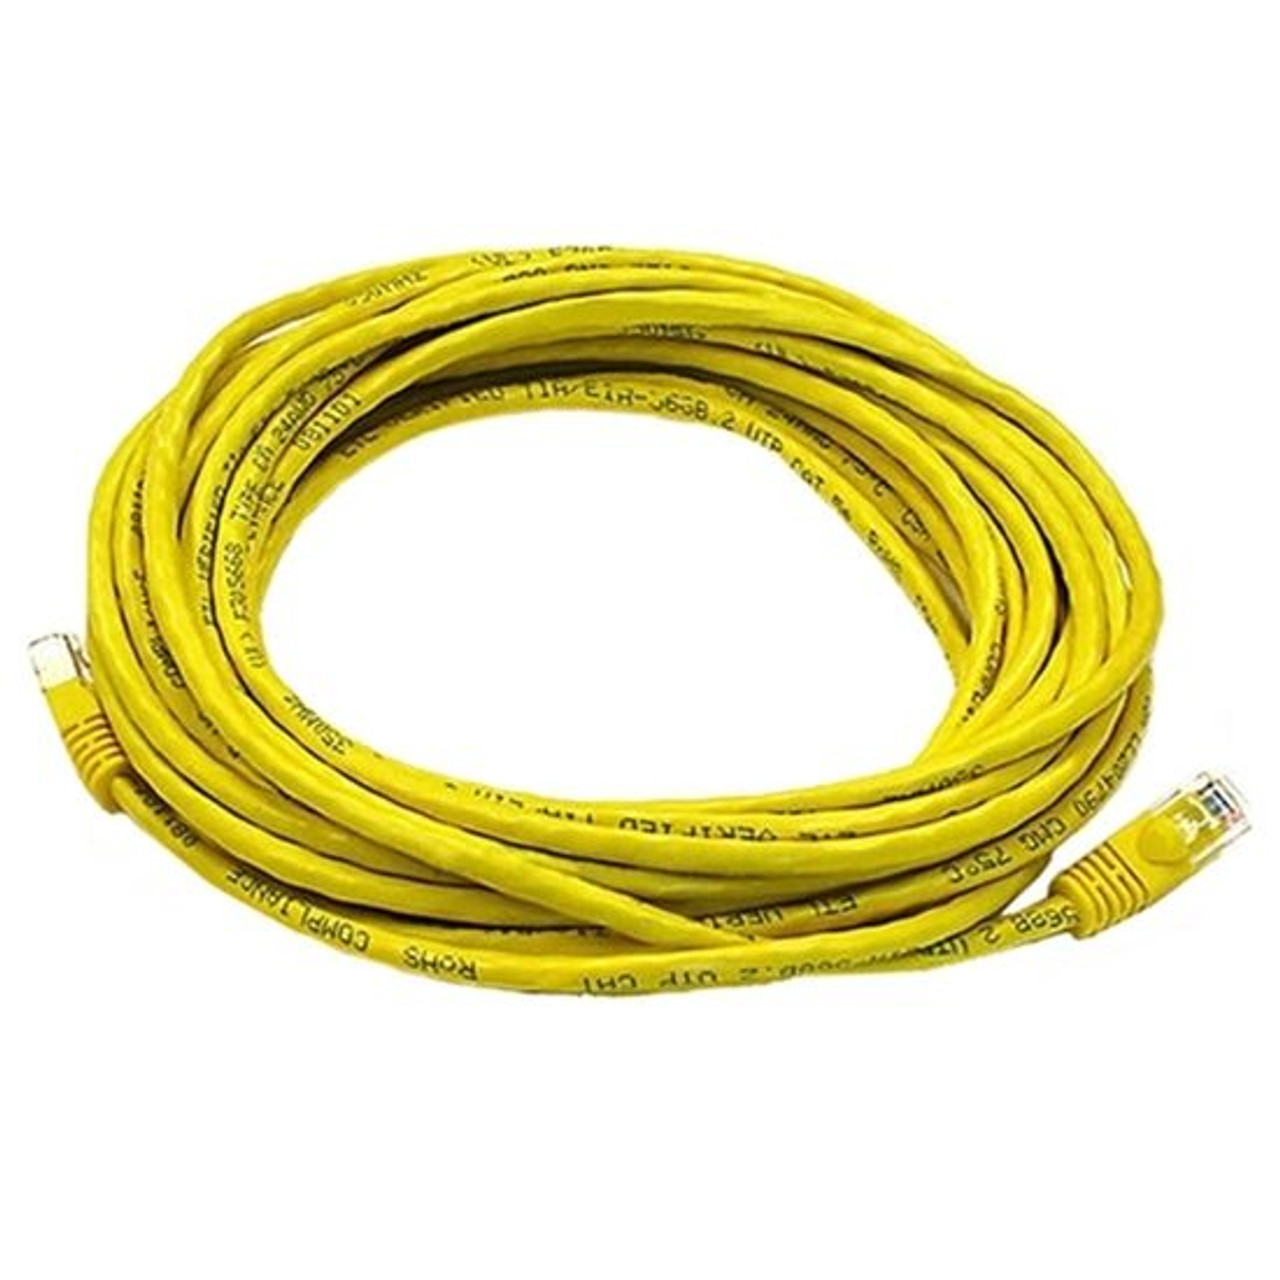 Eagle 1' FT CAT5e Patch Cord Cable Yellow RJ45 Snagless 350 MHz Flush Molded Booted RJ-45 Network Snagless 24 AWG Copper Stranded Male to Male Ethernet Data Computer Gaming Jumper